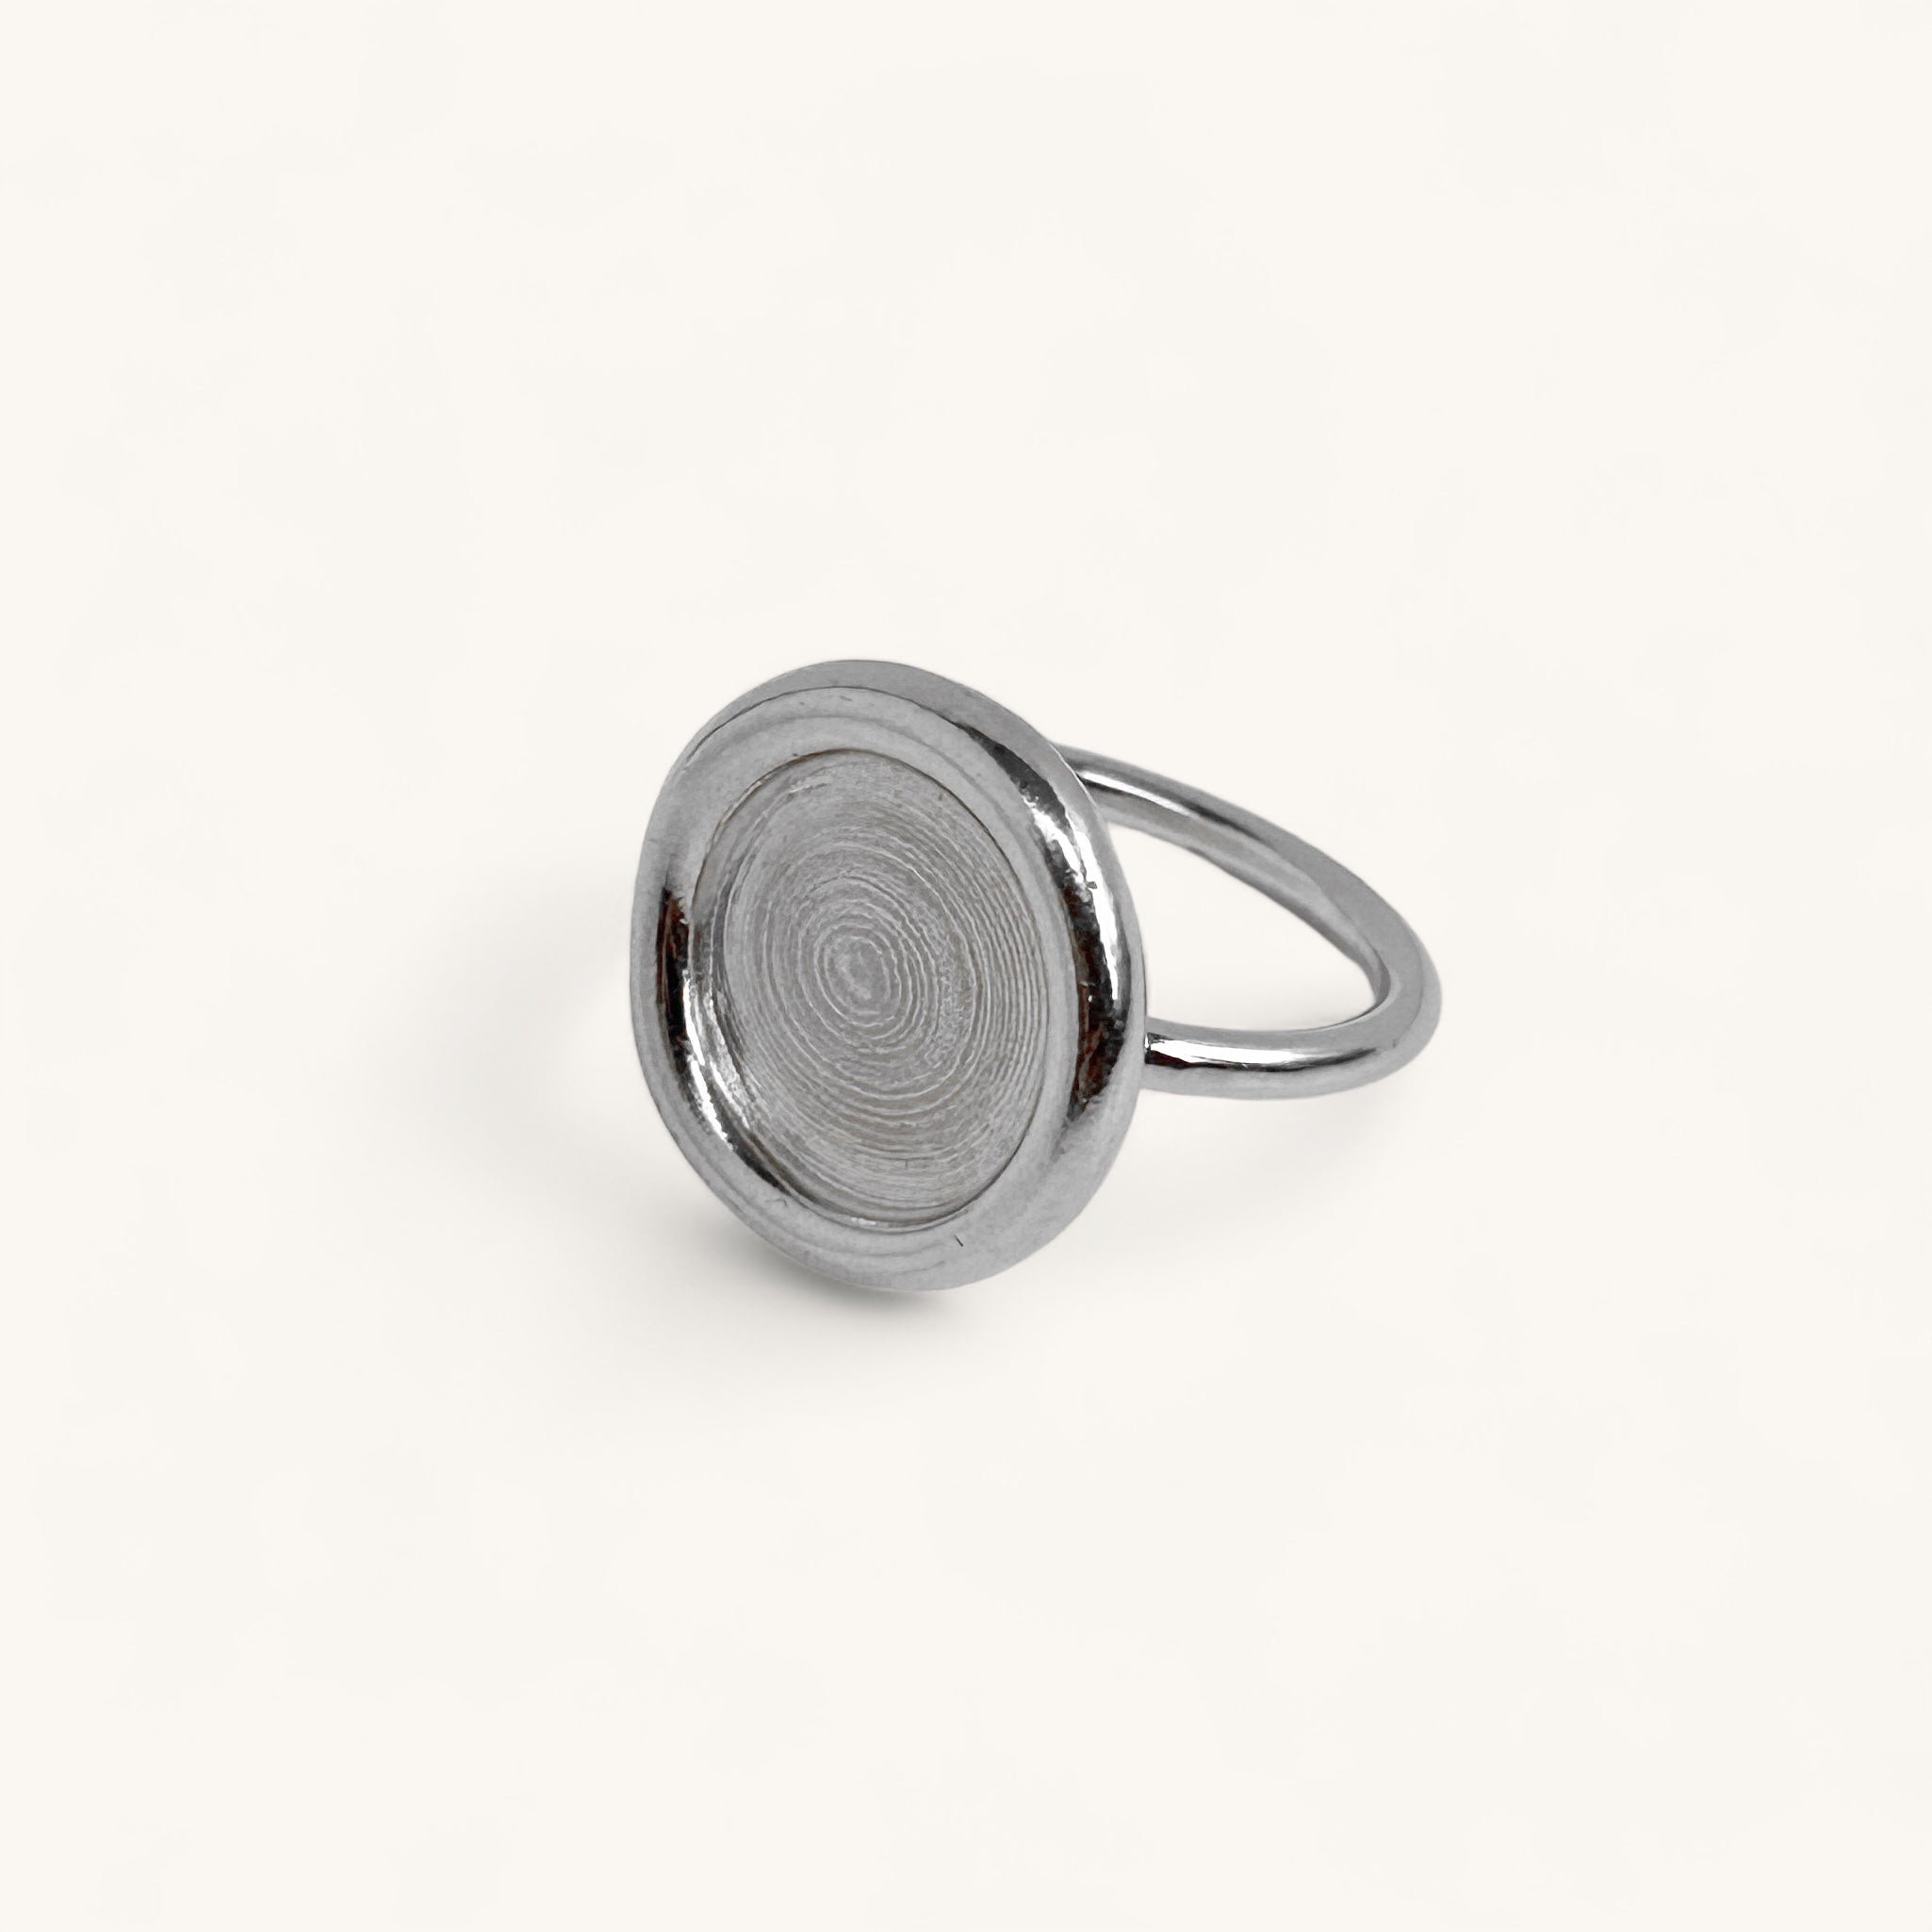 Jennifer Loiselle frame ring in recycled silver